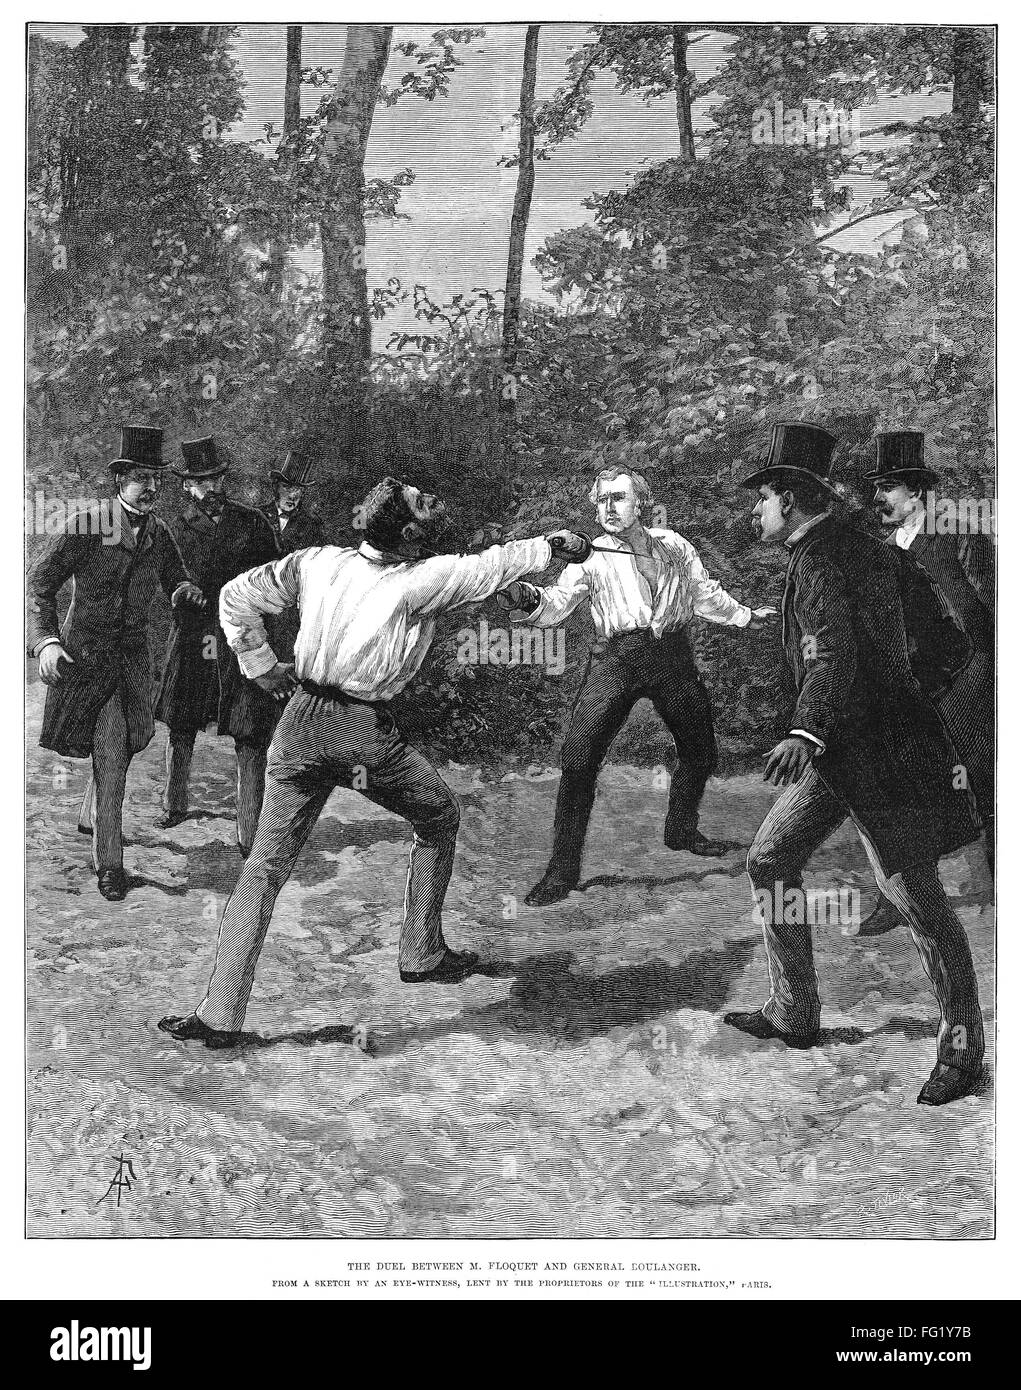 DUELING, 1888. /n'The duel between M. Floquet and General Boulanger.' Engraving, 1888. Stock Photo